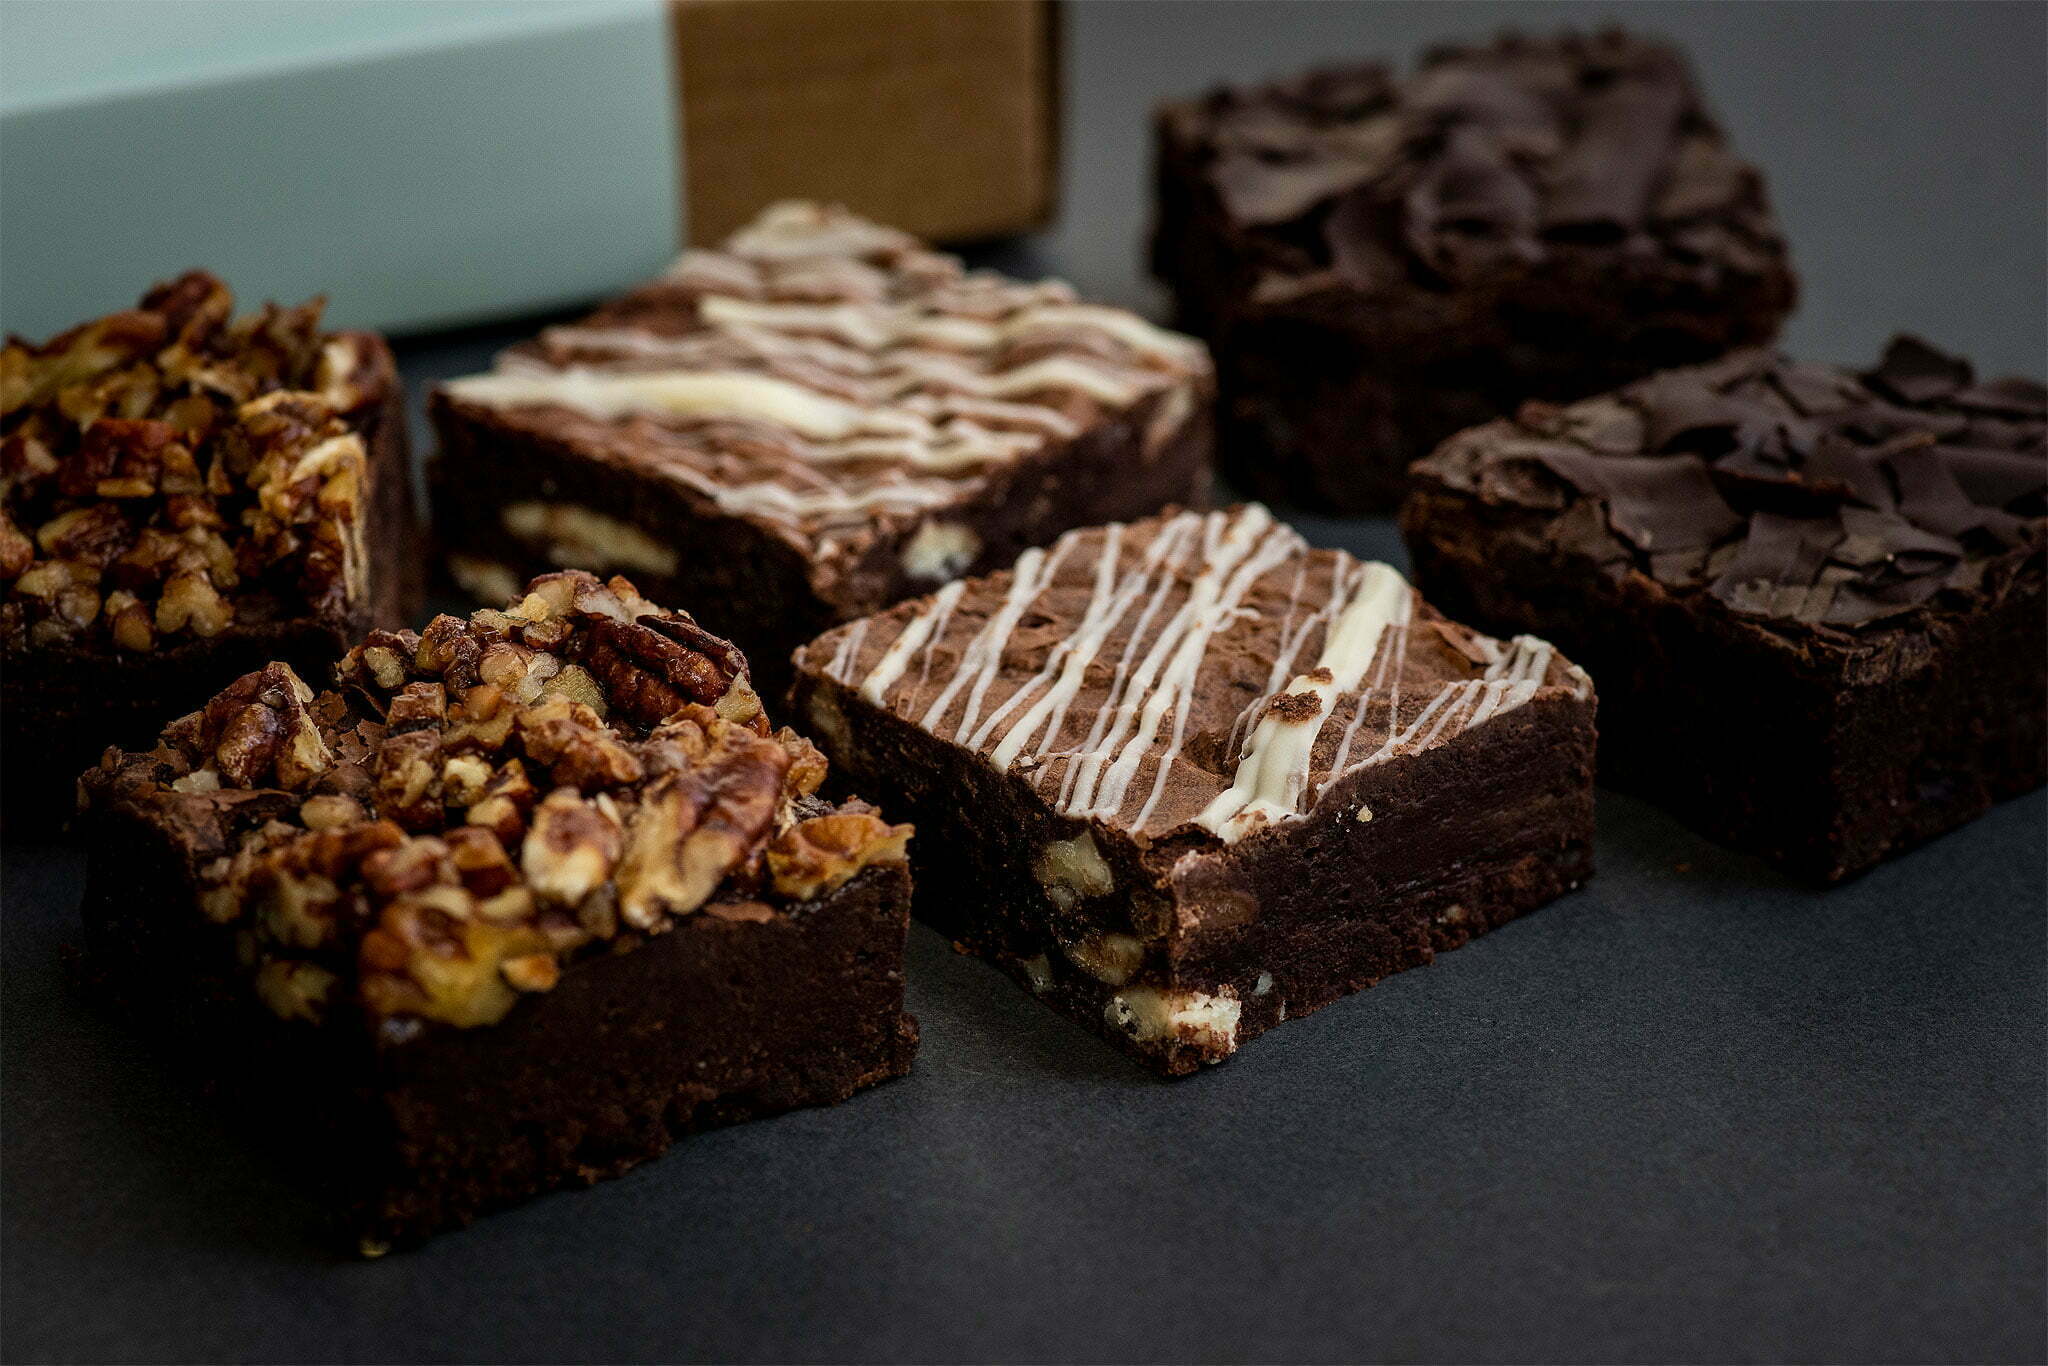 6 brownies laid out on a dark background with a brownie box in the background.